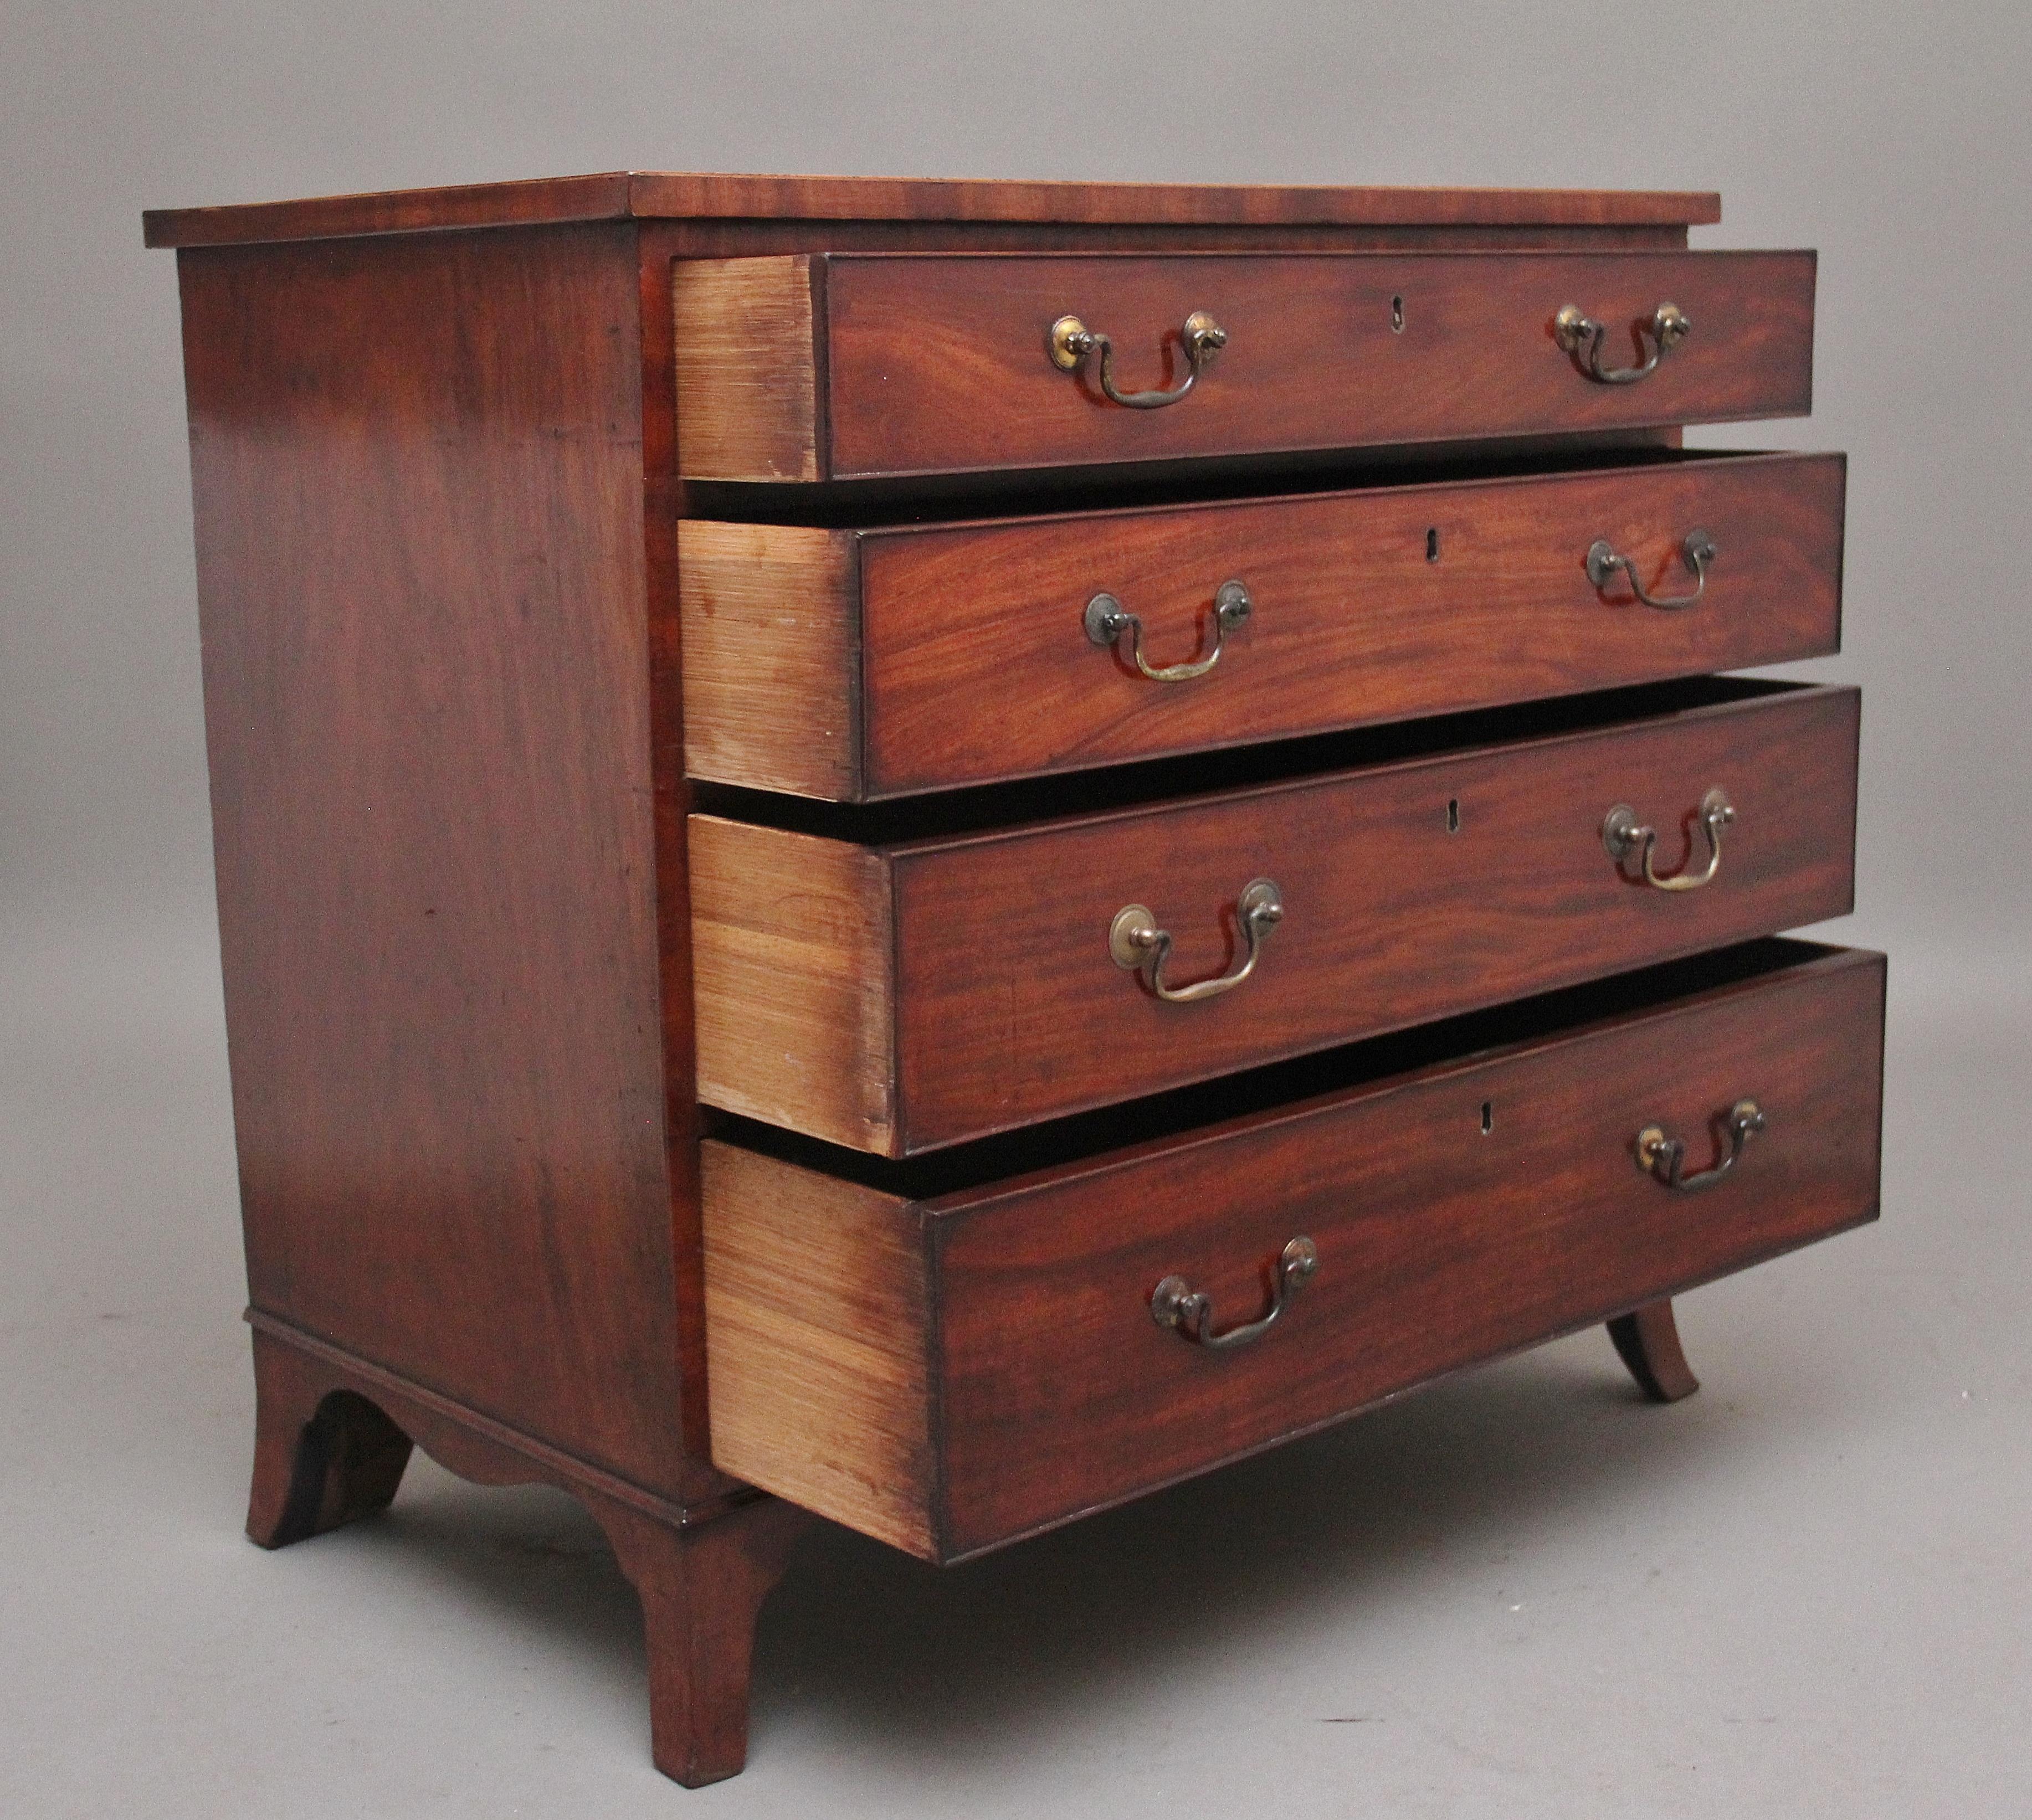 19th century Mahogany chest of drawers, having a nice figured top with inlay around the edge, four graduated oak lined drawers with the original brass swan neck handles, shaped apron, supported on splay feet. circa 1840.